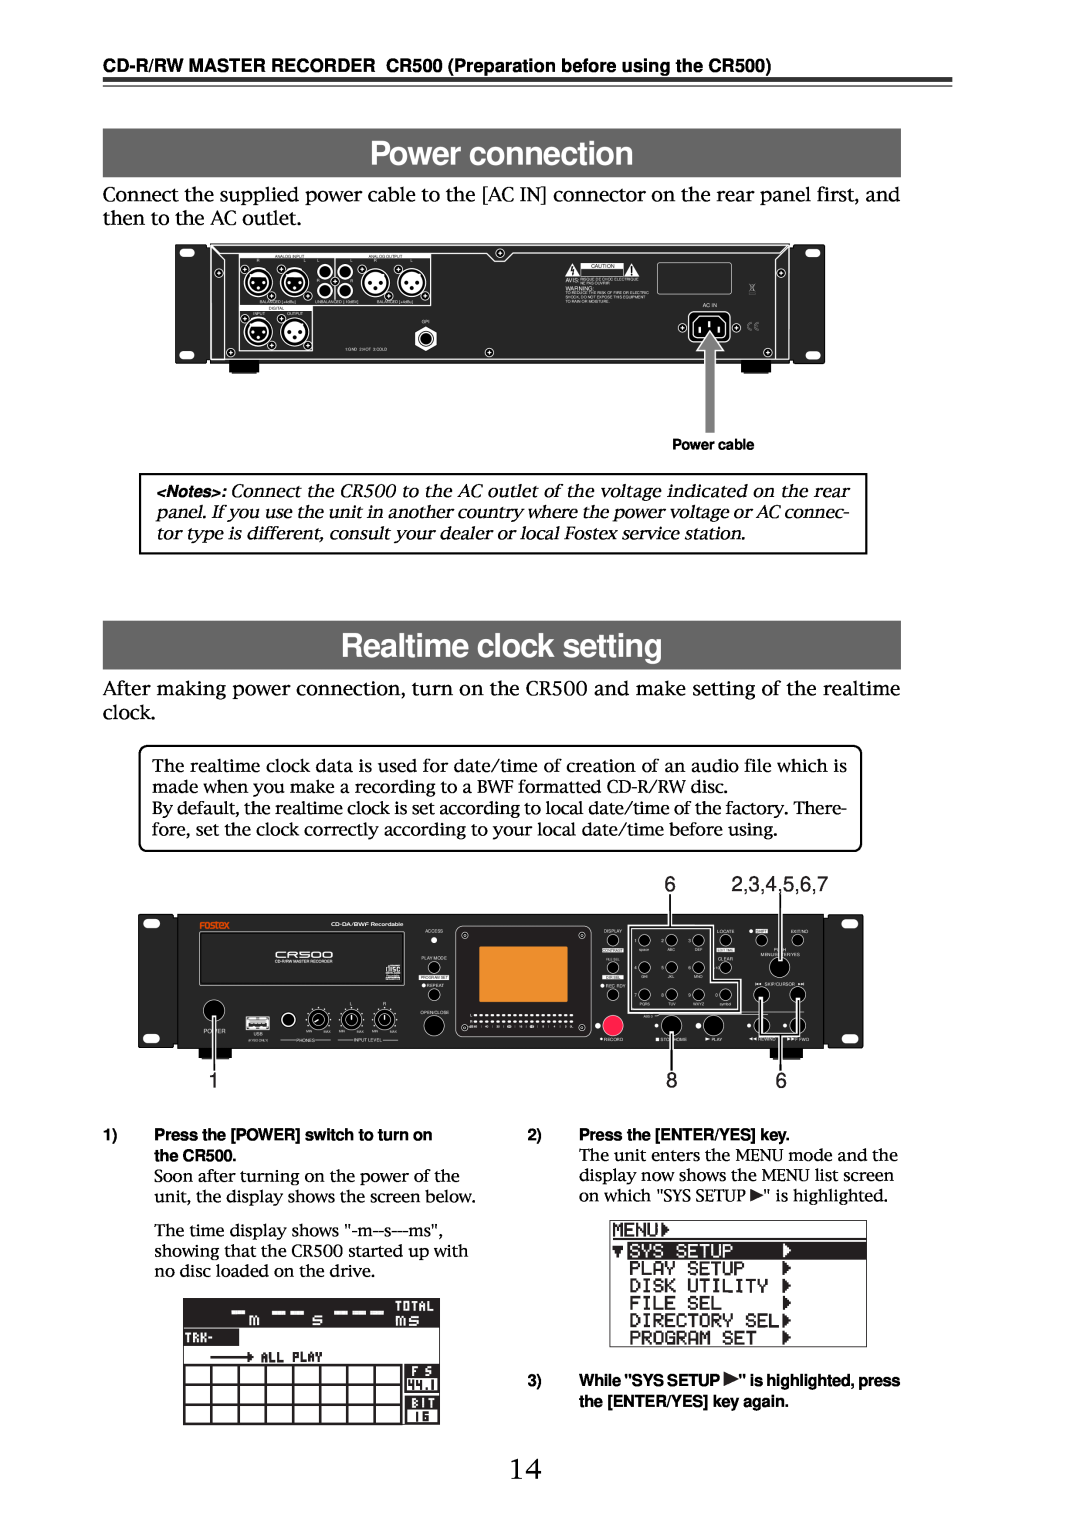 Fostex CR500 owner manual Power connection, Realtime clock setting, 2,3,4,5,6,7 